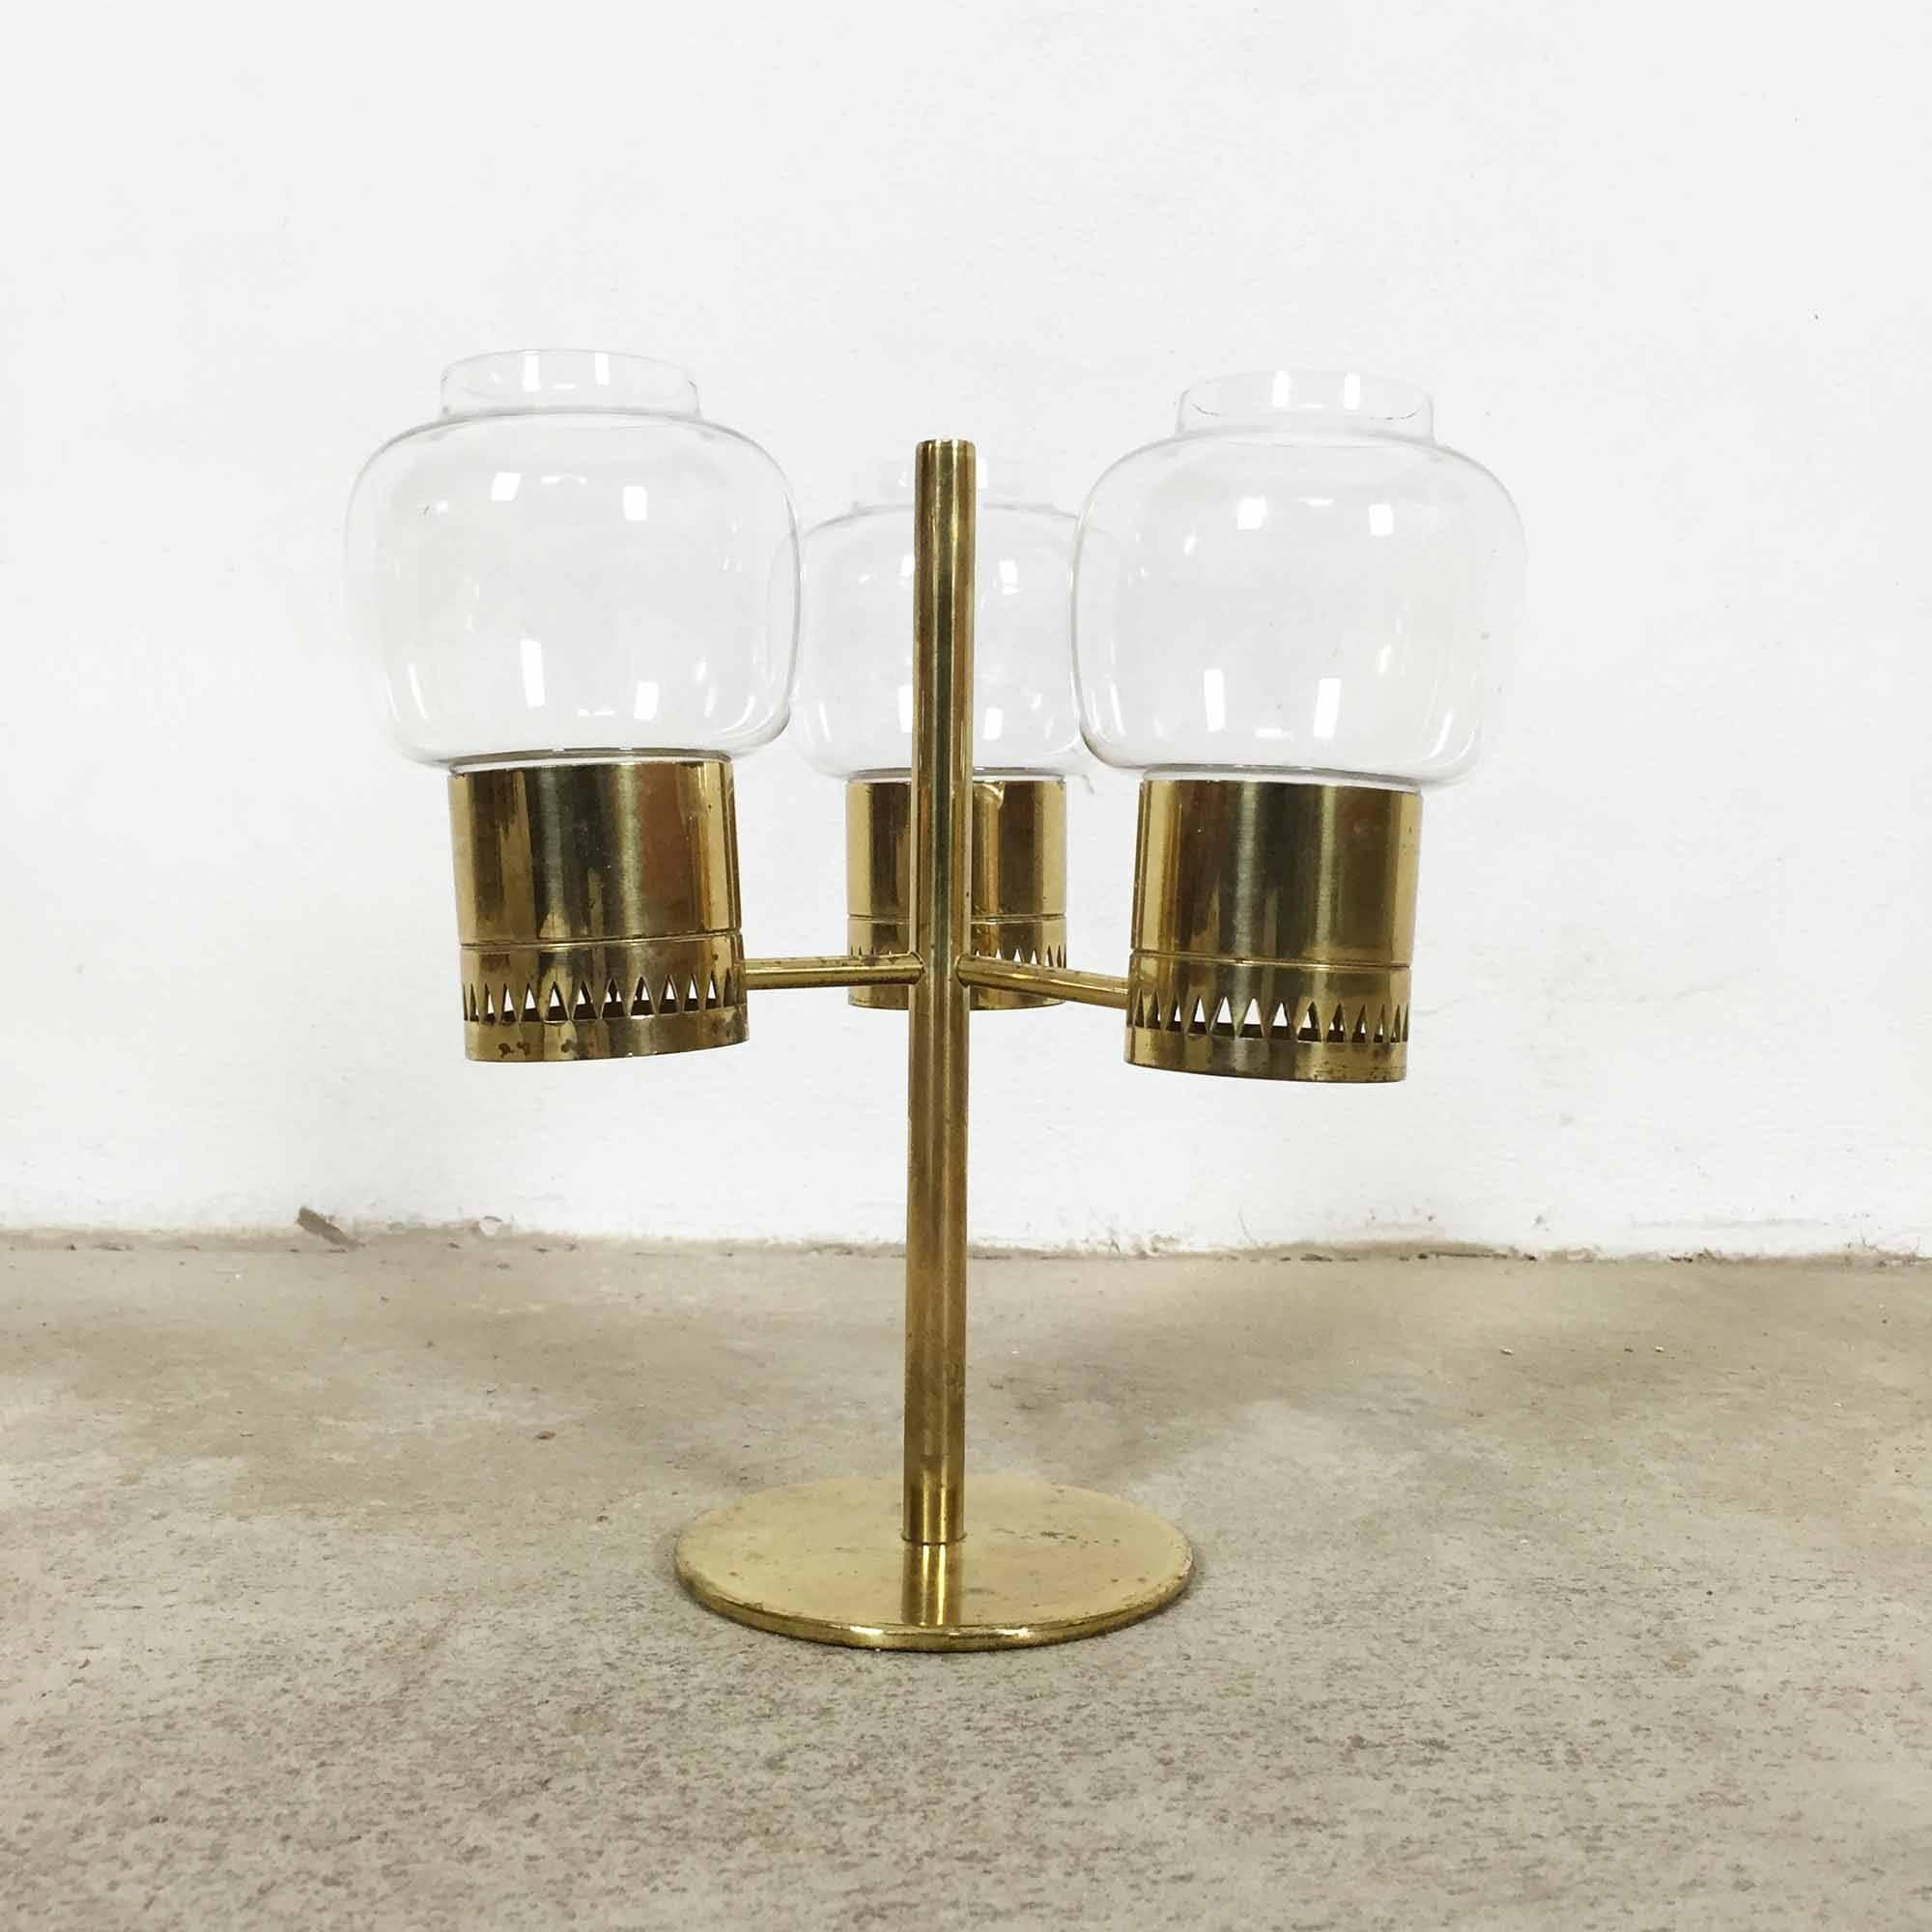 Brass candleholder.

Designed by Hans-Agne Jakobsson.

Produced by Hans-Agne Jakobsson A B, Markaryd, Sweden.

Original 1960s Hans-Agne Jakobsson candleholder produced in Sweden. Made of tubular brass with triangular patterned perforations and